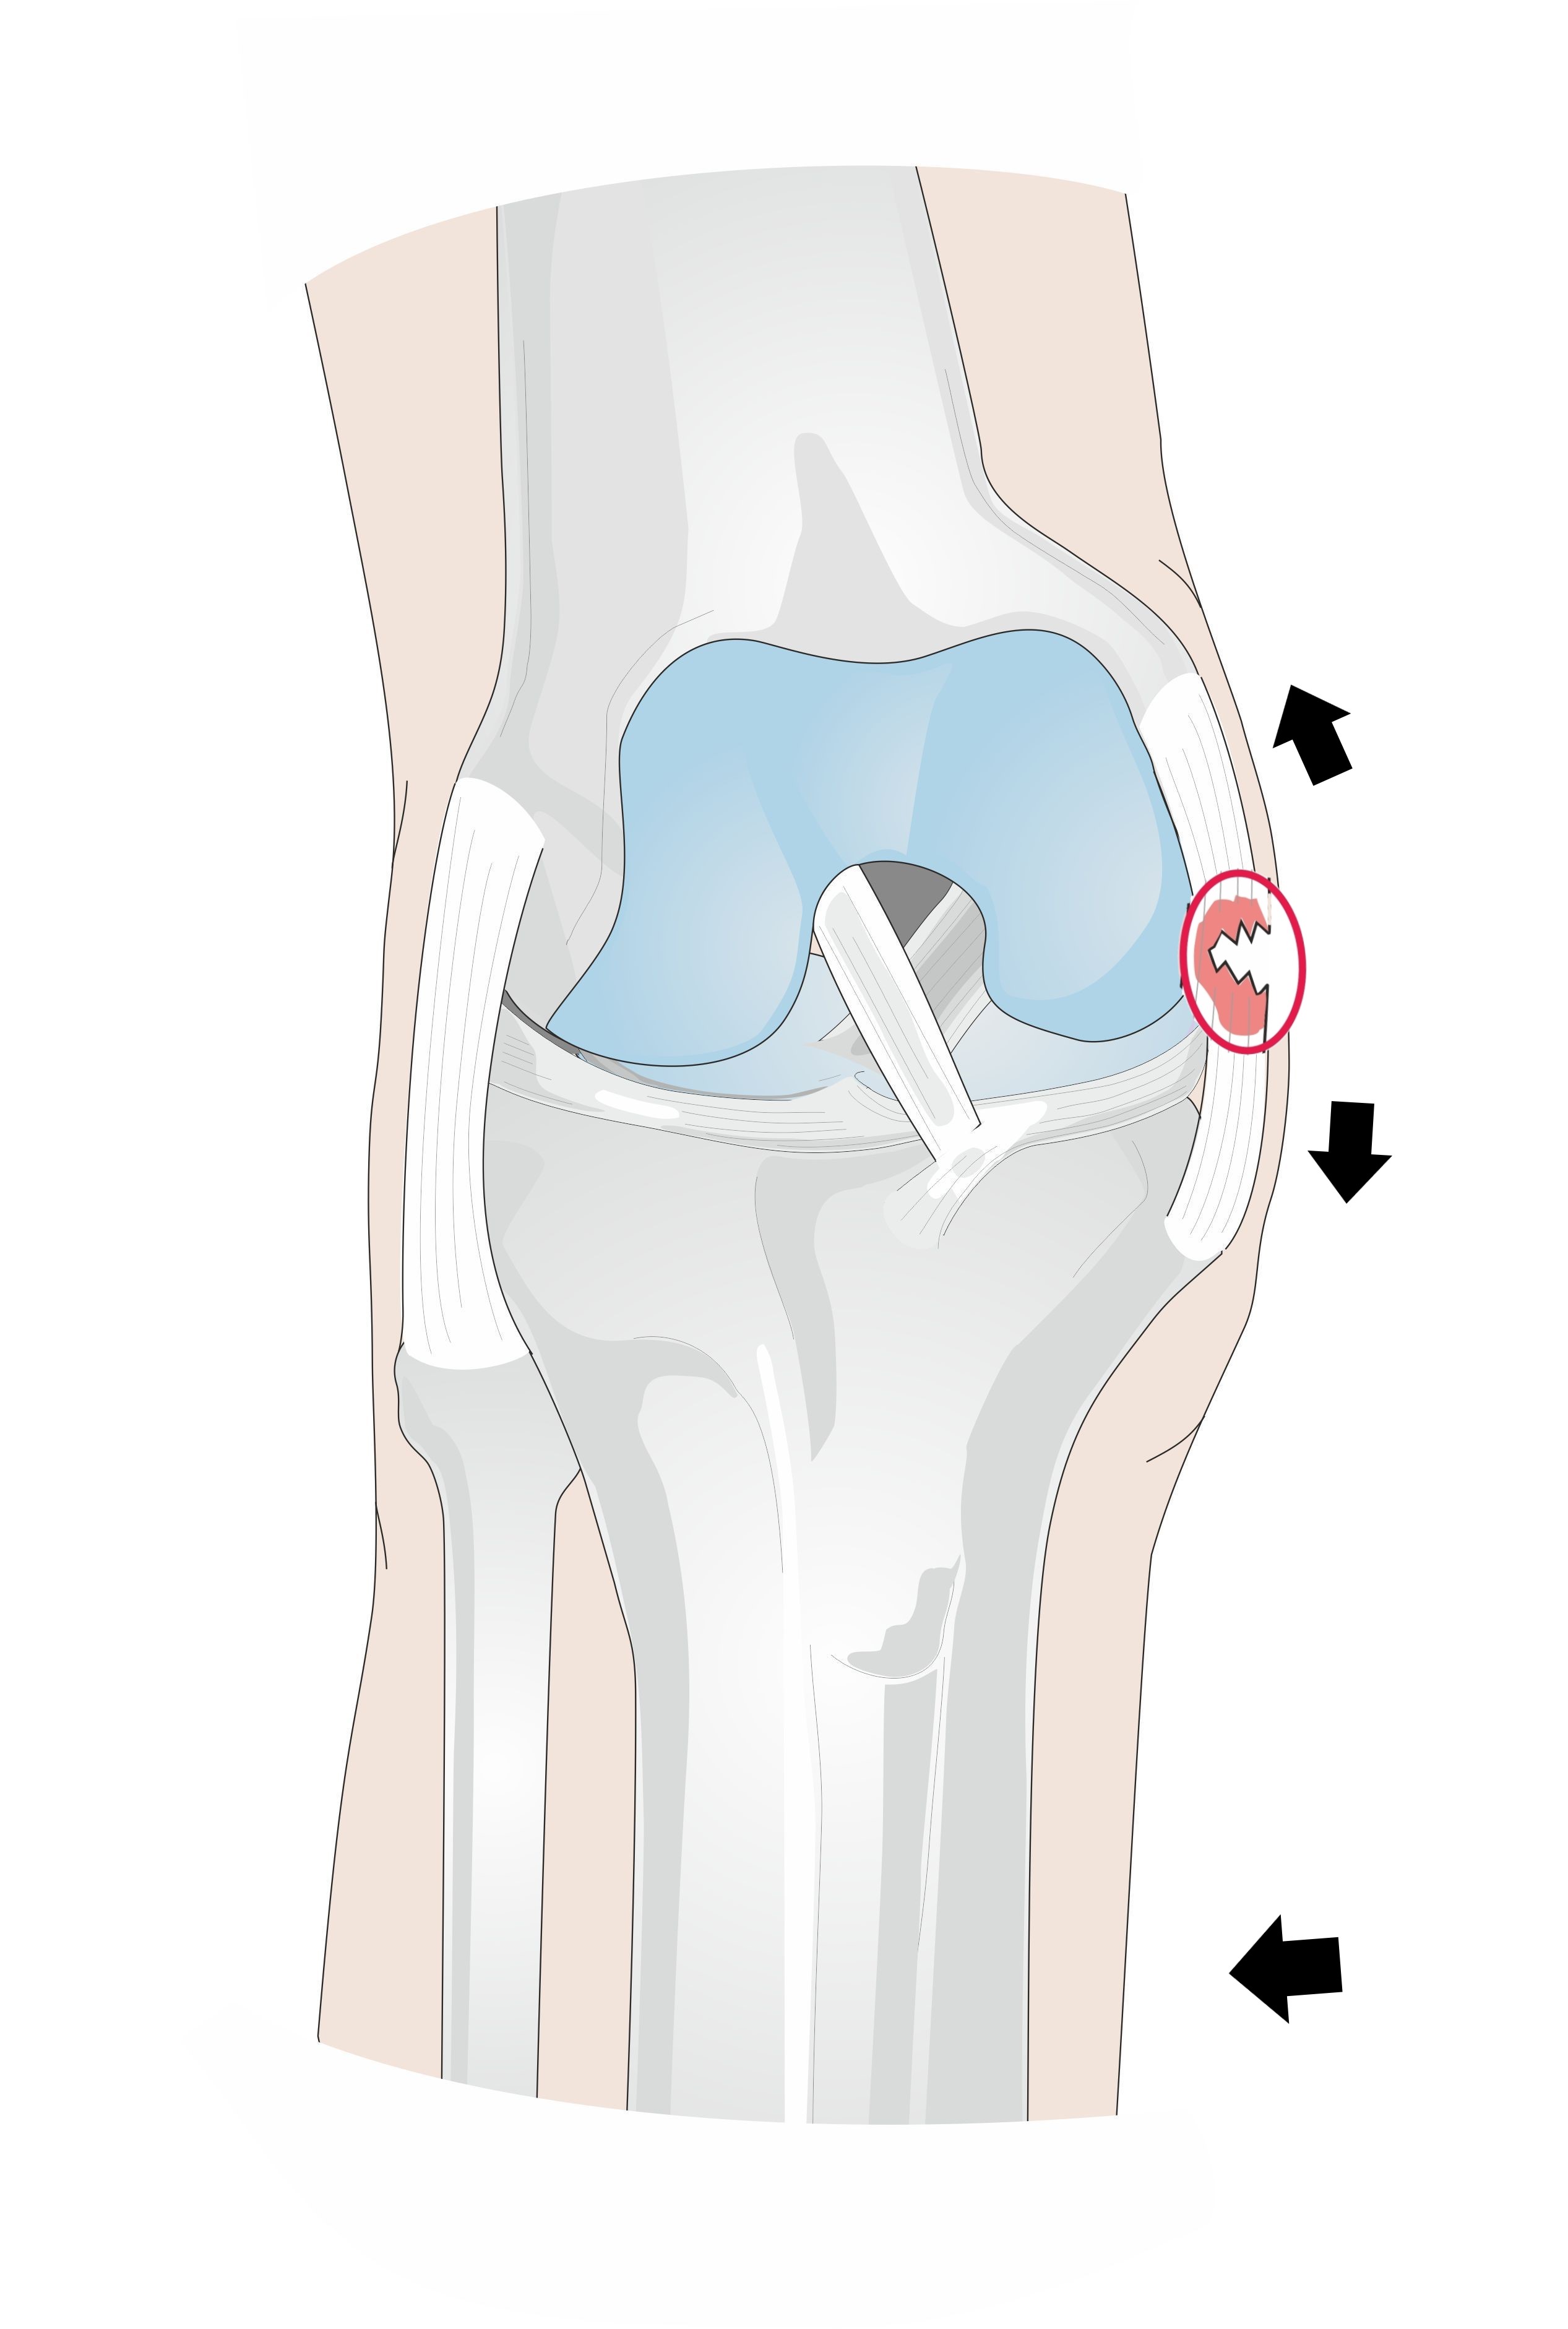 Medial Collateral Ligament (MCL) Injuries - My Family Physio